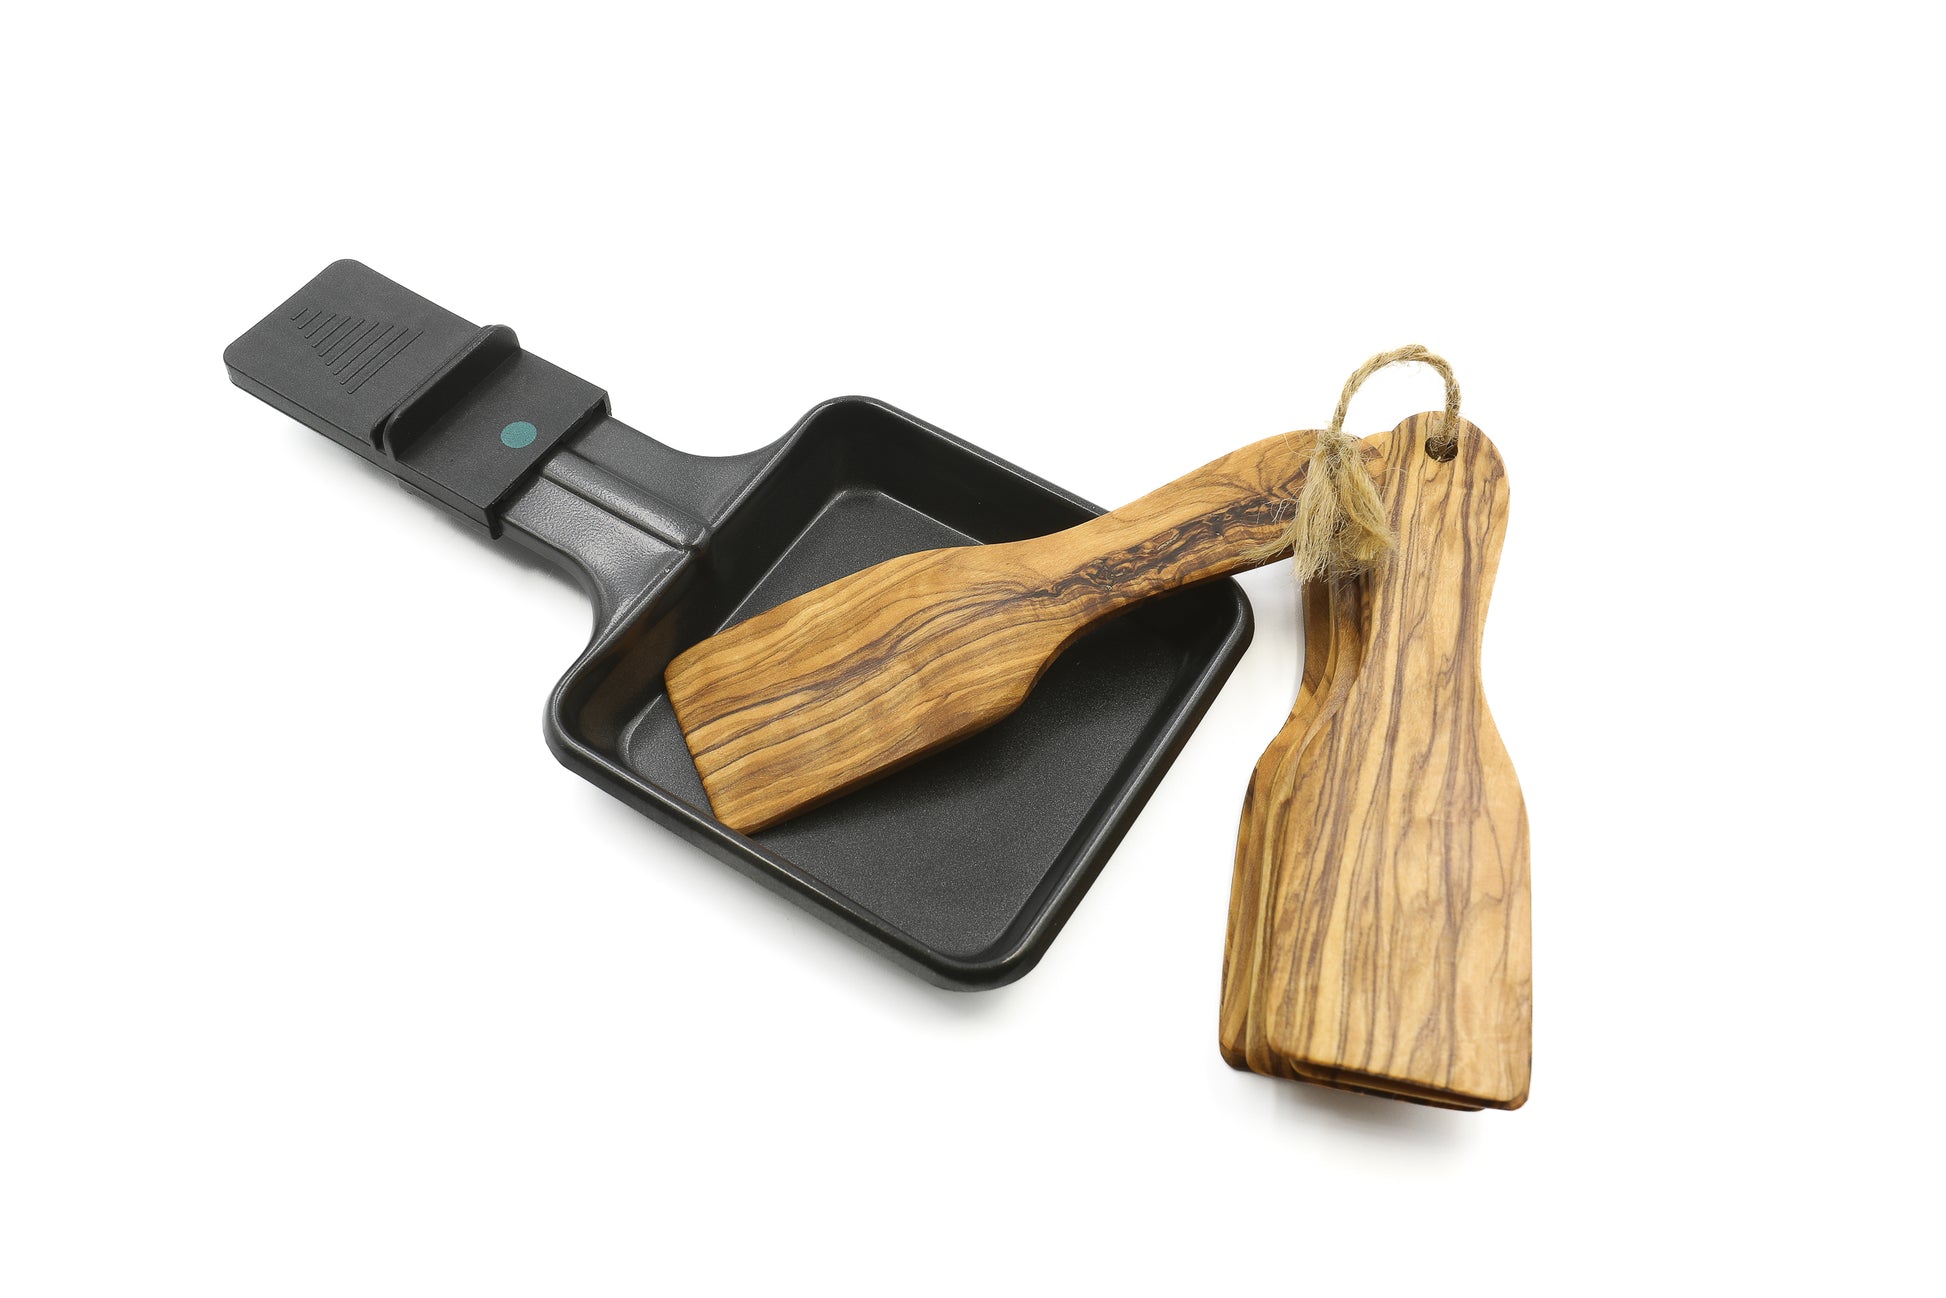 Elegant olive wood spatulas tailored for raclette gatherings, set of 6